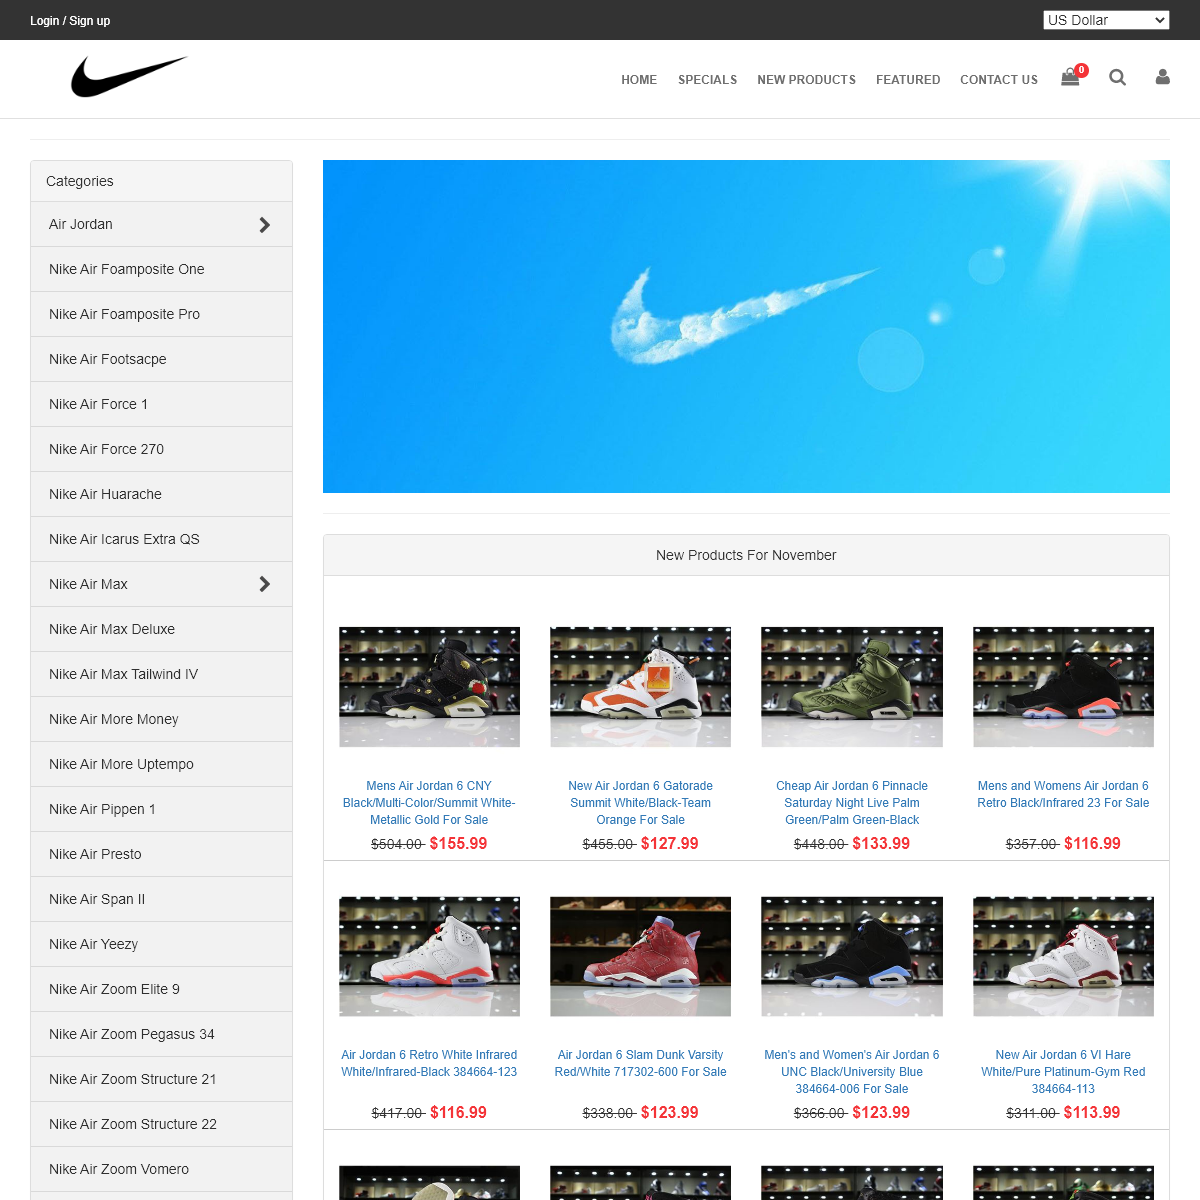 A complete backup of www.nike-clearance.us.com